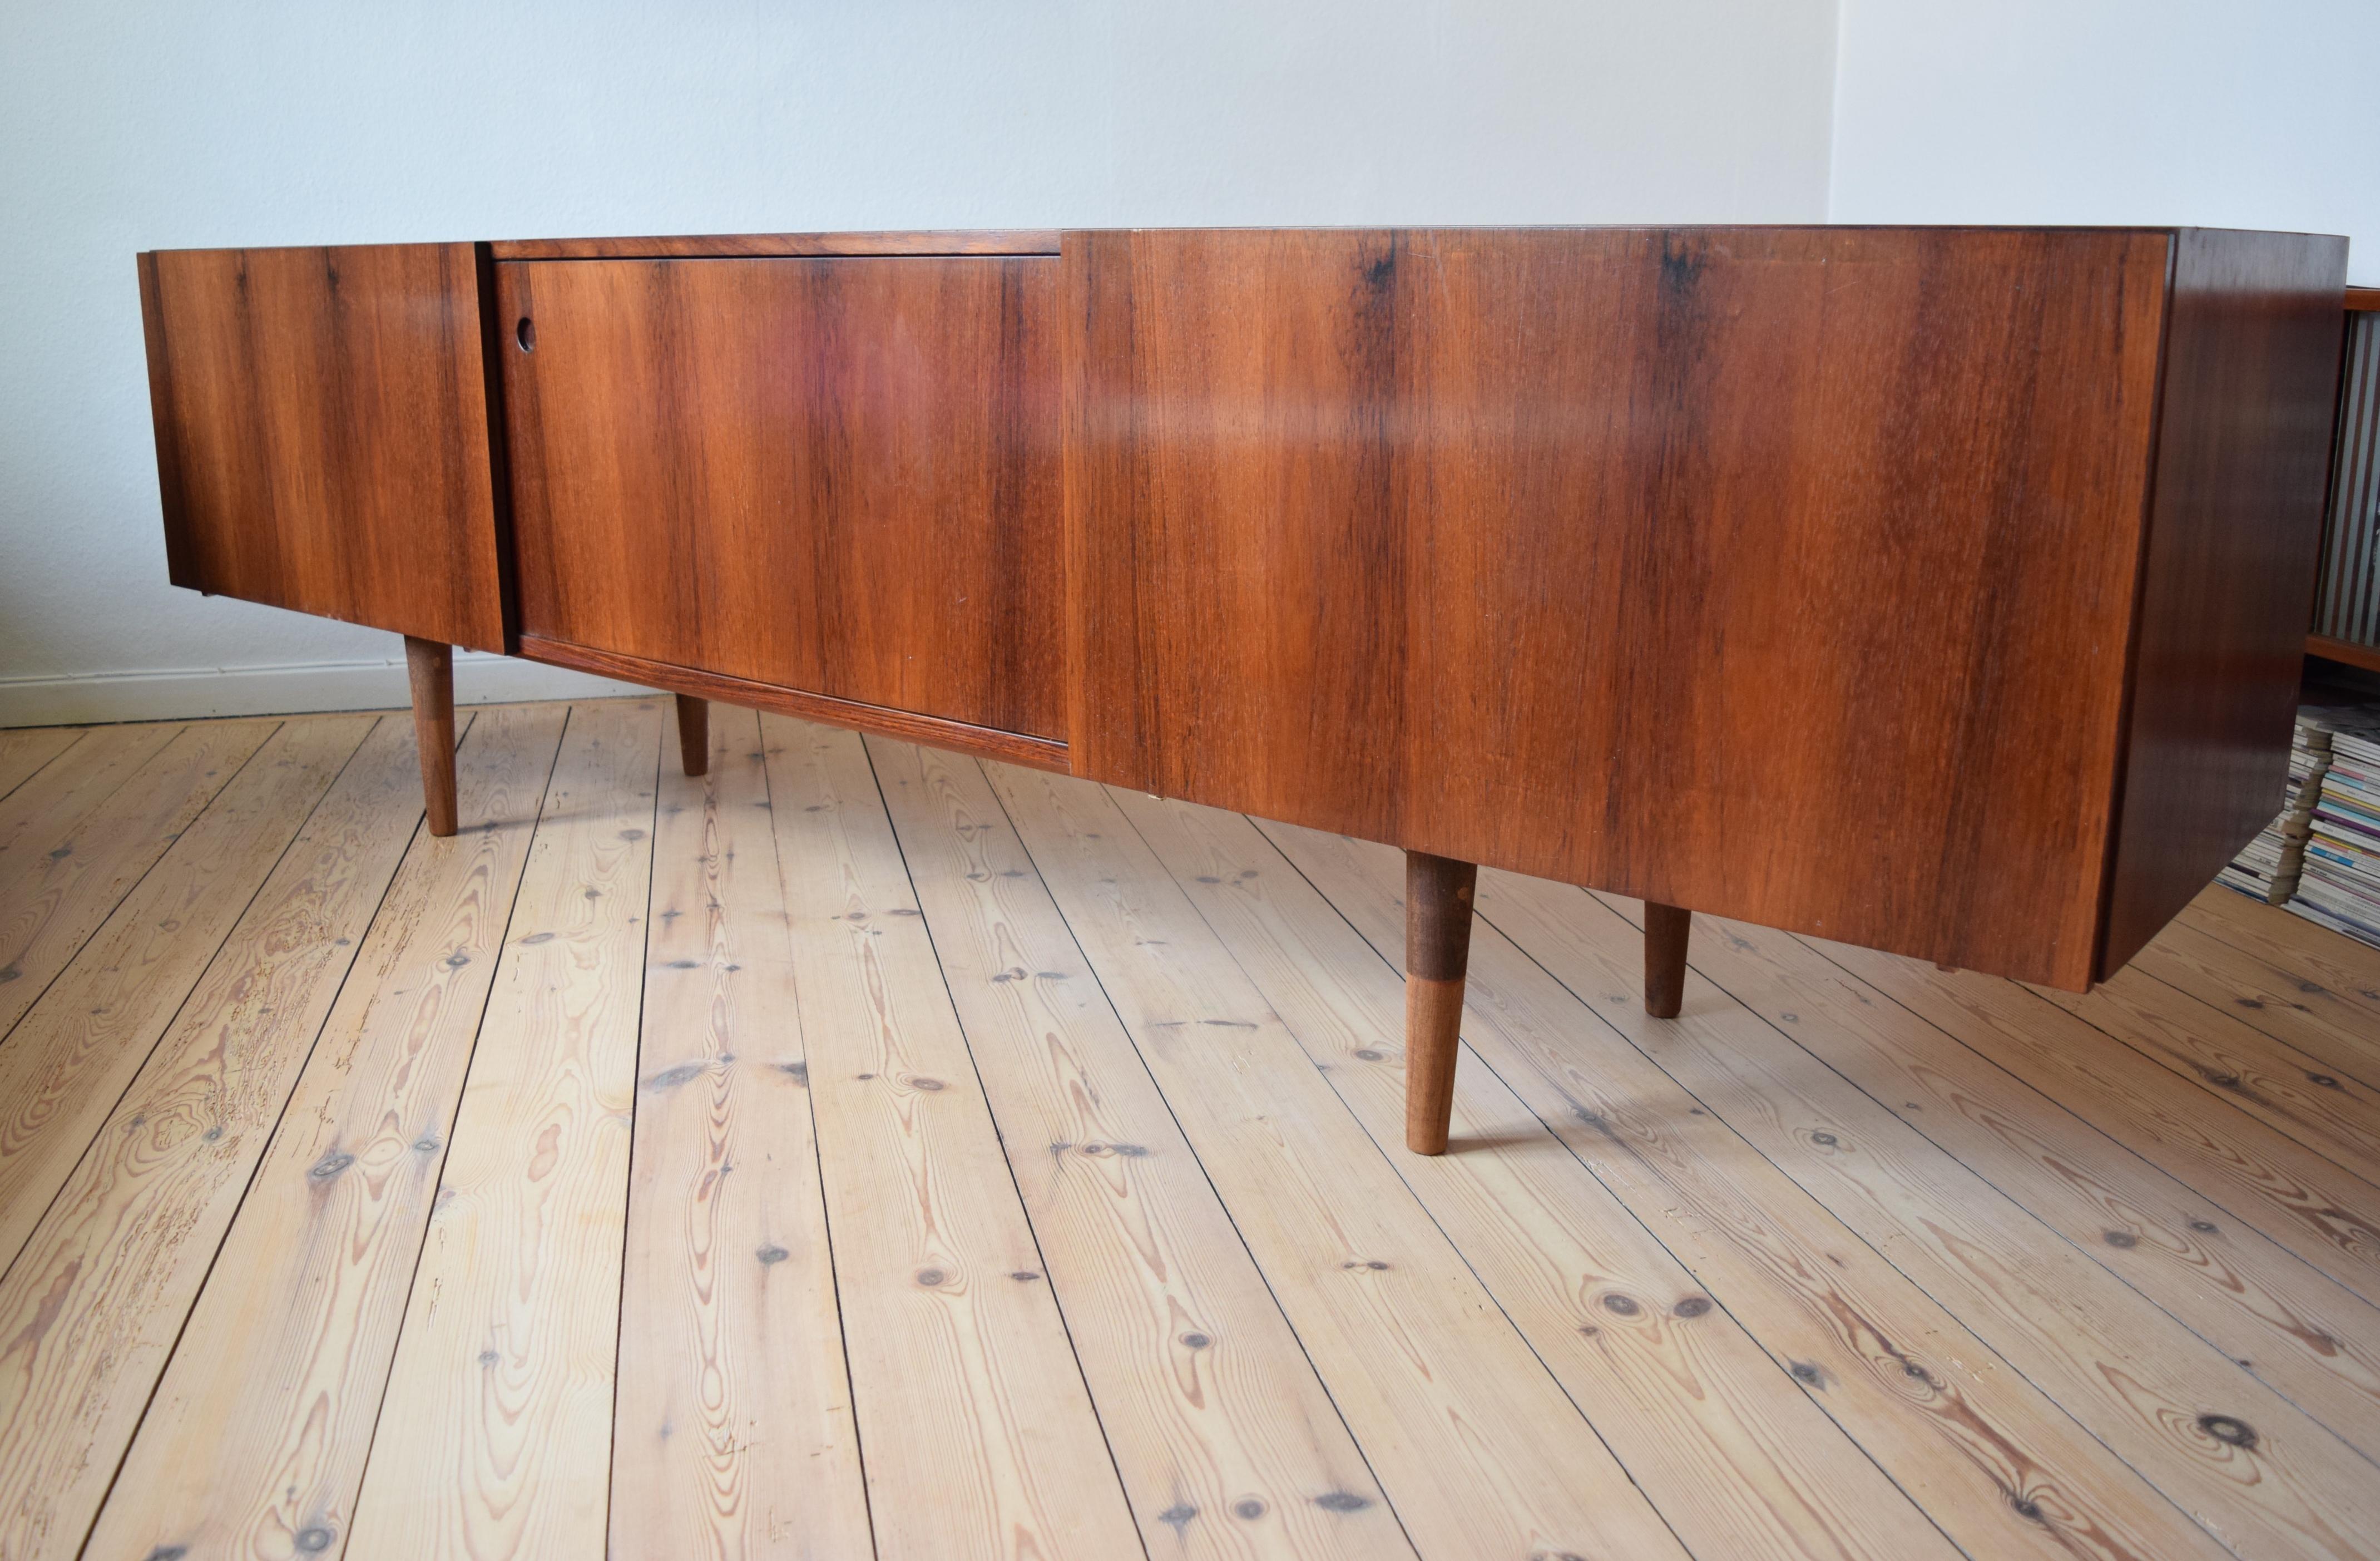 Very long and low credenza by Ib Kofod Larsen manufactured in Denmark in the late 1960s-early 1970s. Rosewood with maple interior and oak drawers. Sits on turned and tapered two-tone teak legs. Very deep with plenty of storage space. Three small